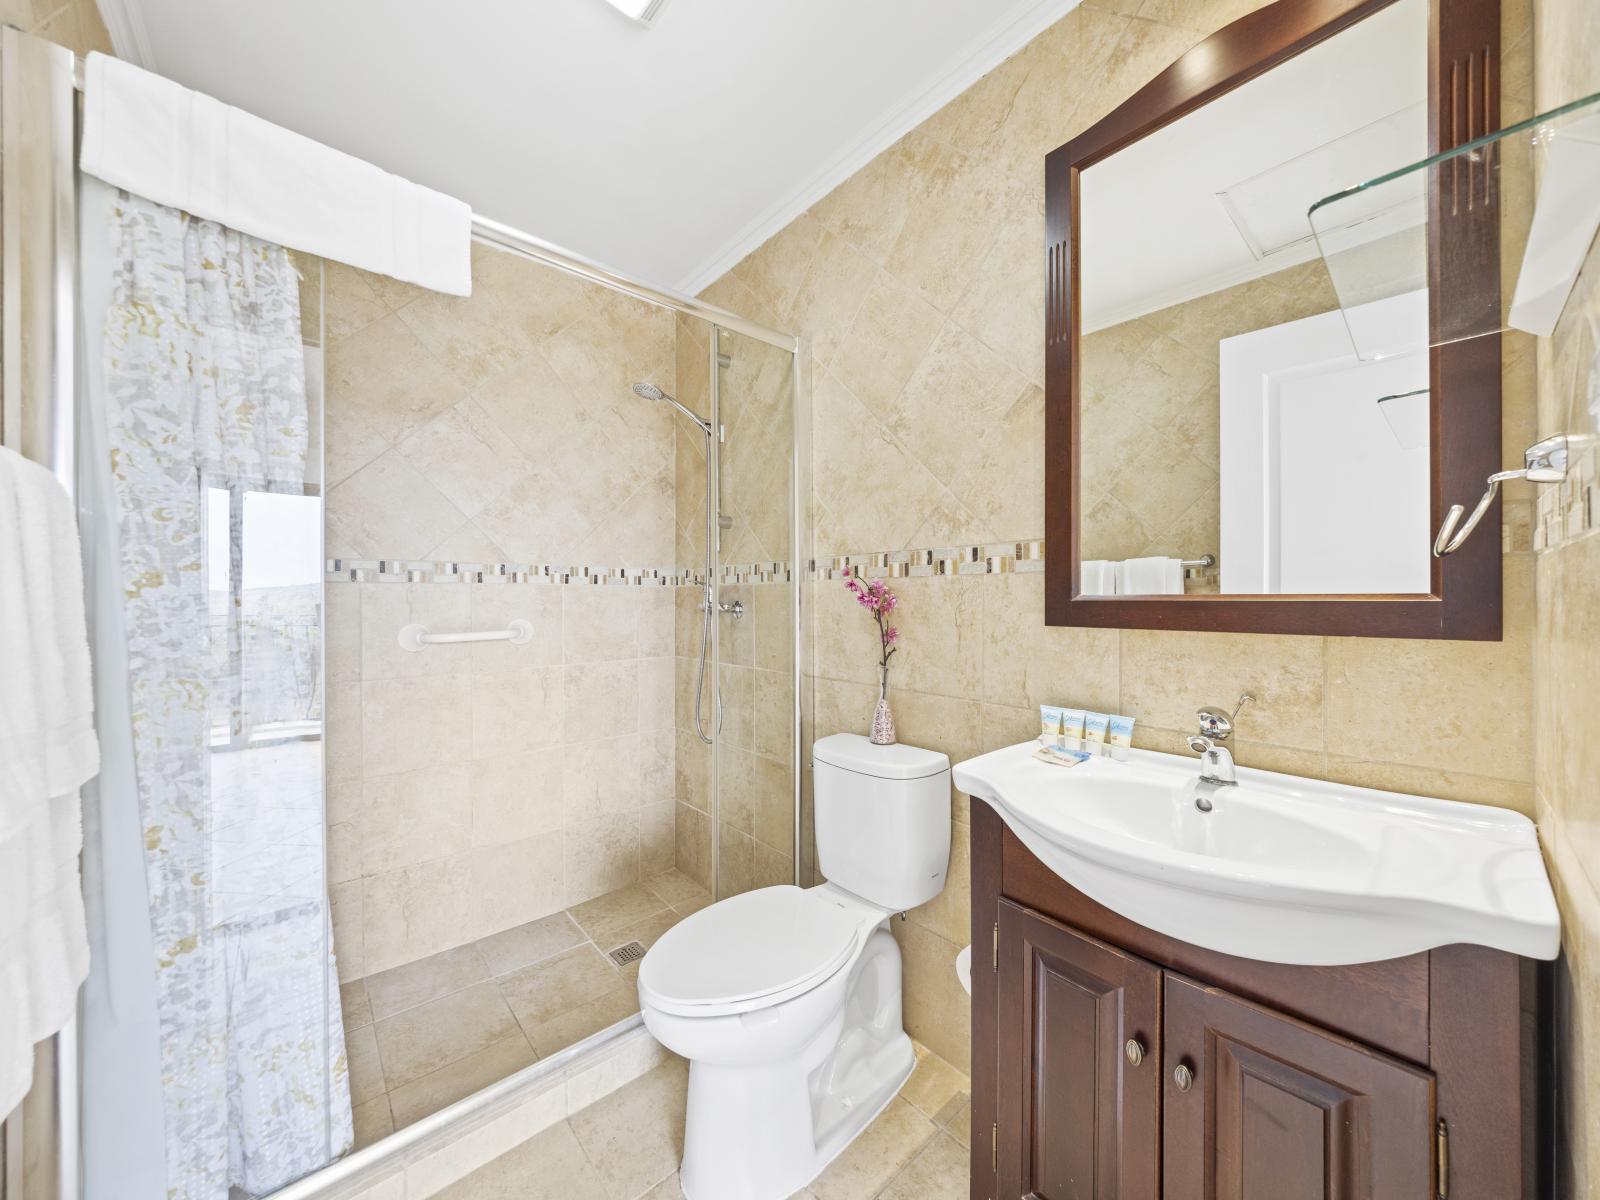 Step into luxury: the second bedroom's bathroom features a spacious walk-in shower for a rejuvenating experience.